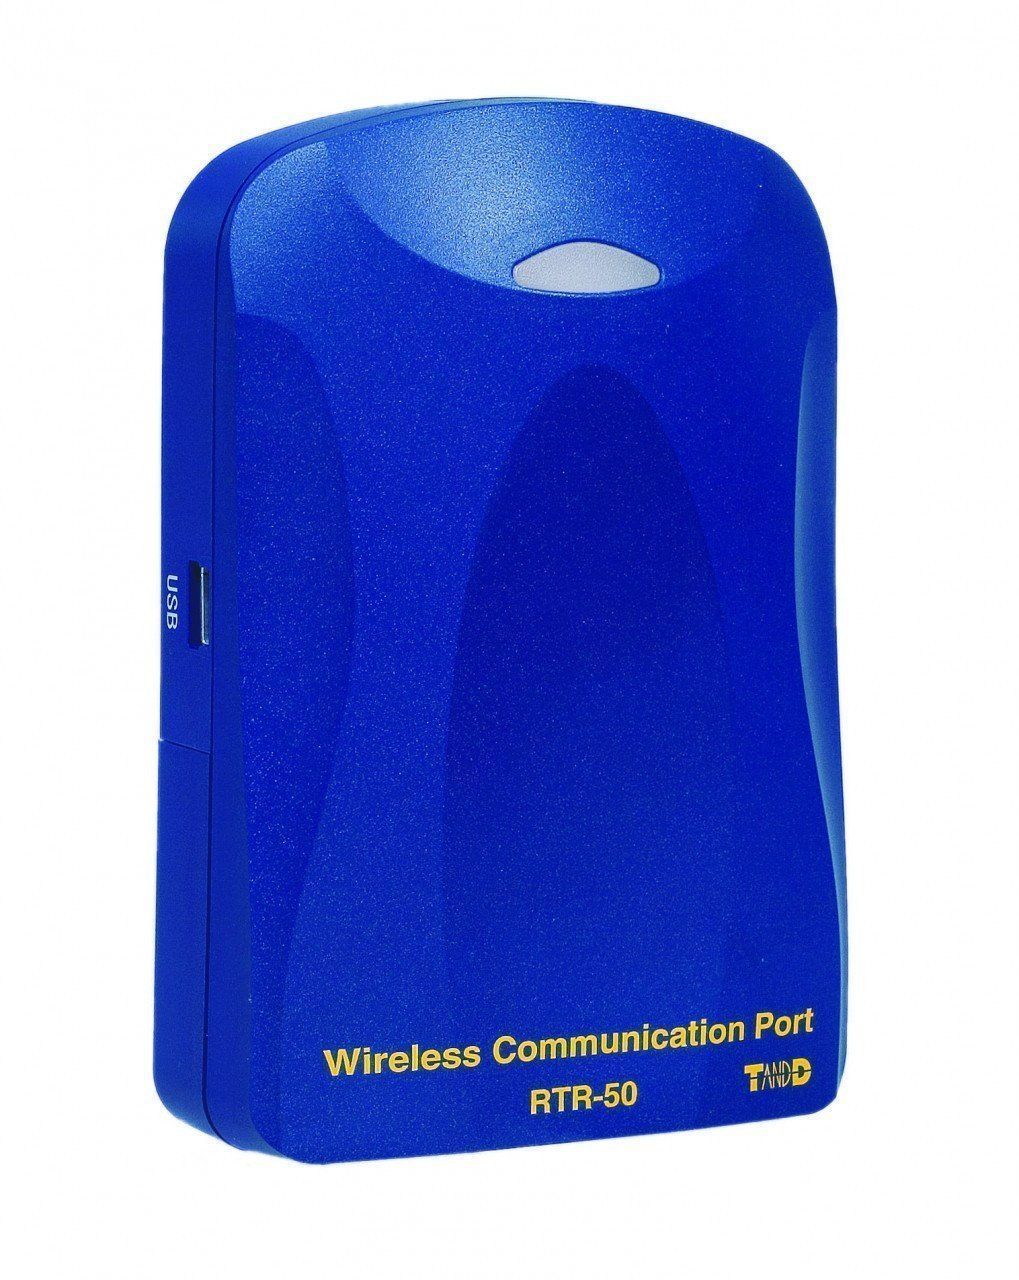 RTR-50 Legacy USB Connected Base Station and Repeater